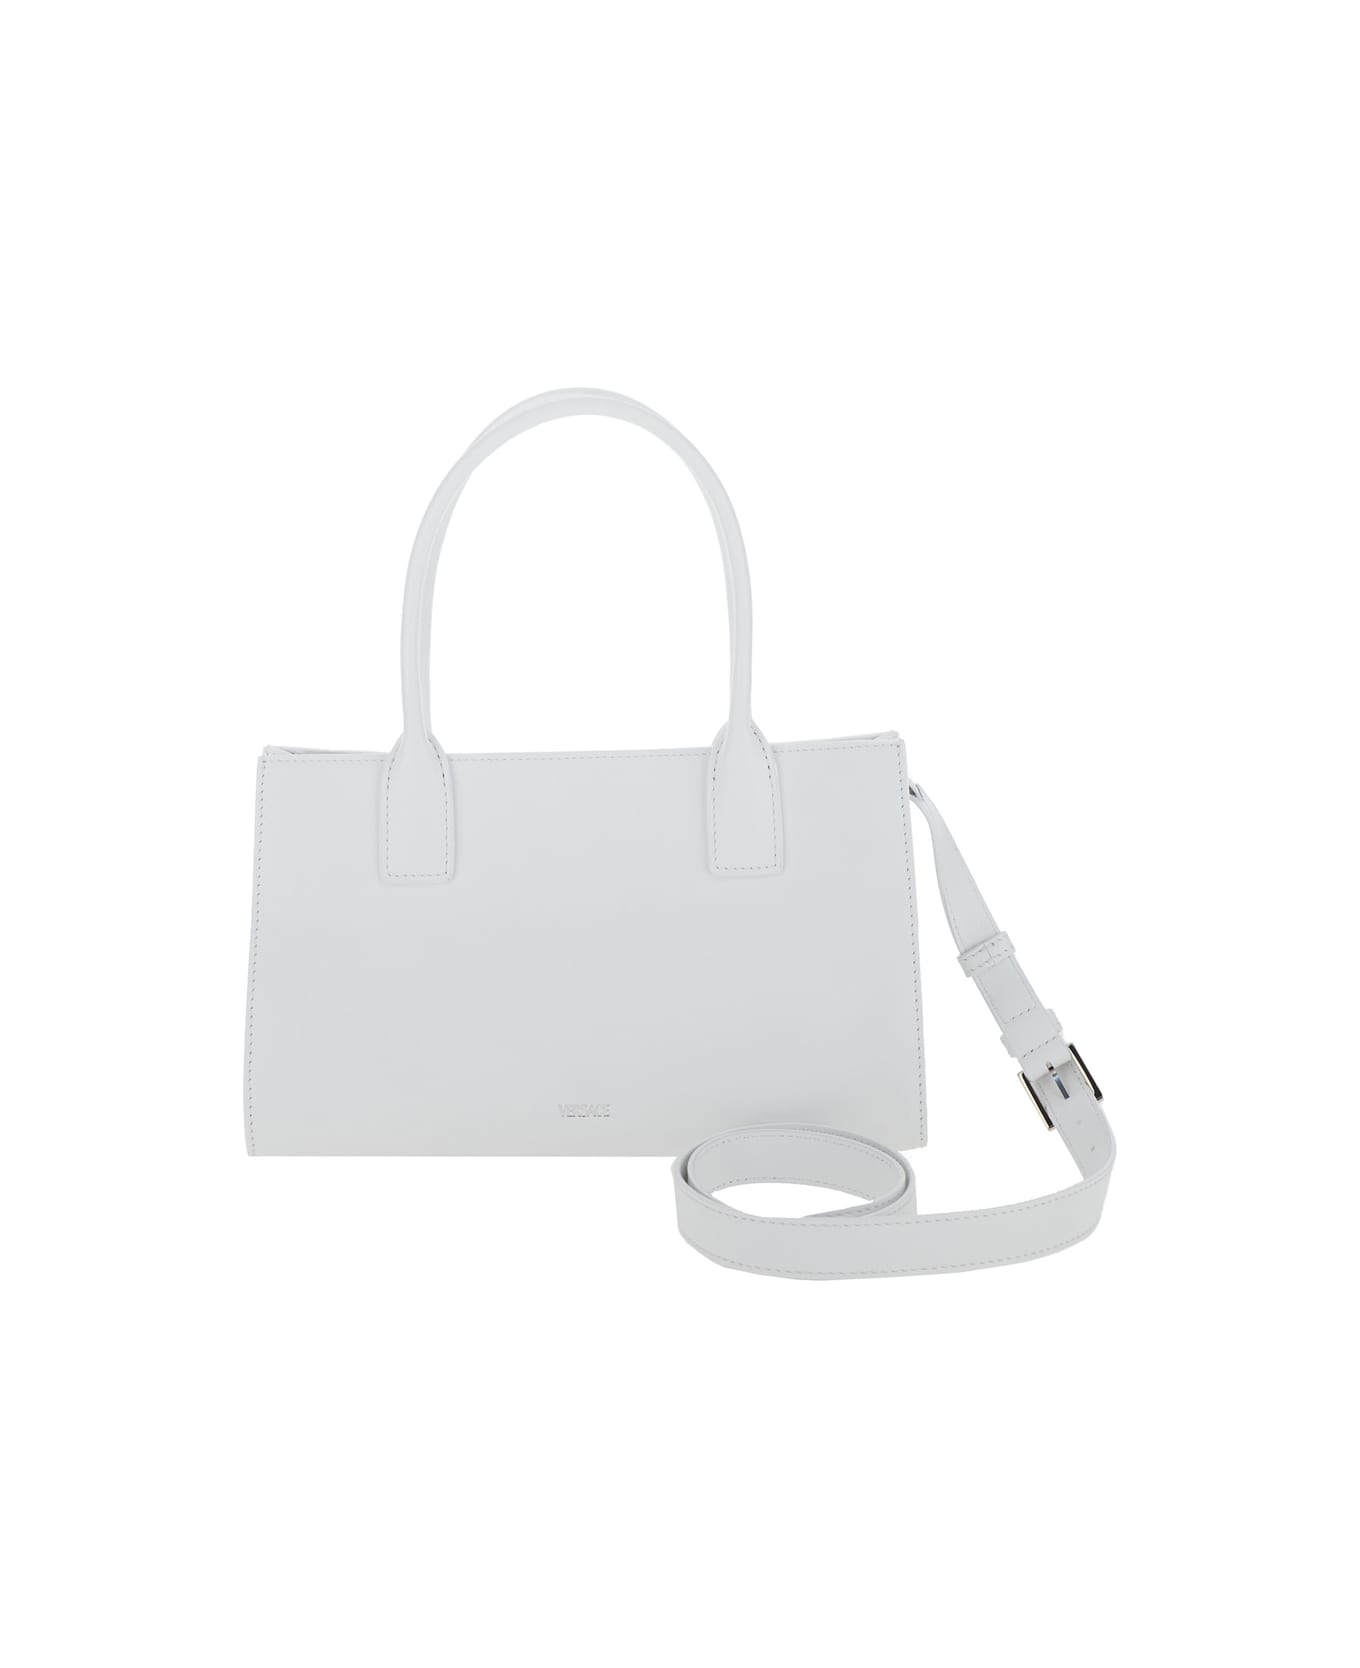 Versace 'medusa 95' White Tote Bag With Logo Detail In Smooth Leather Woman - White